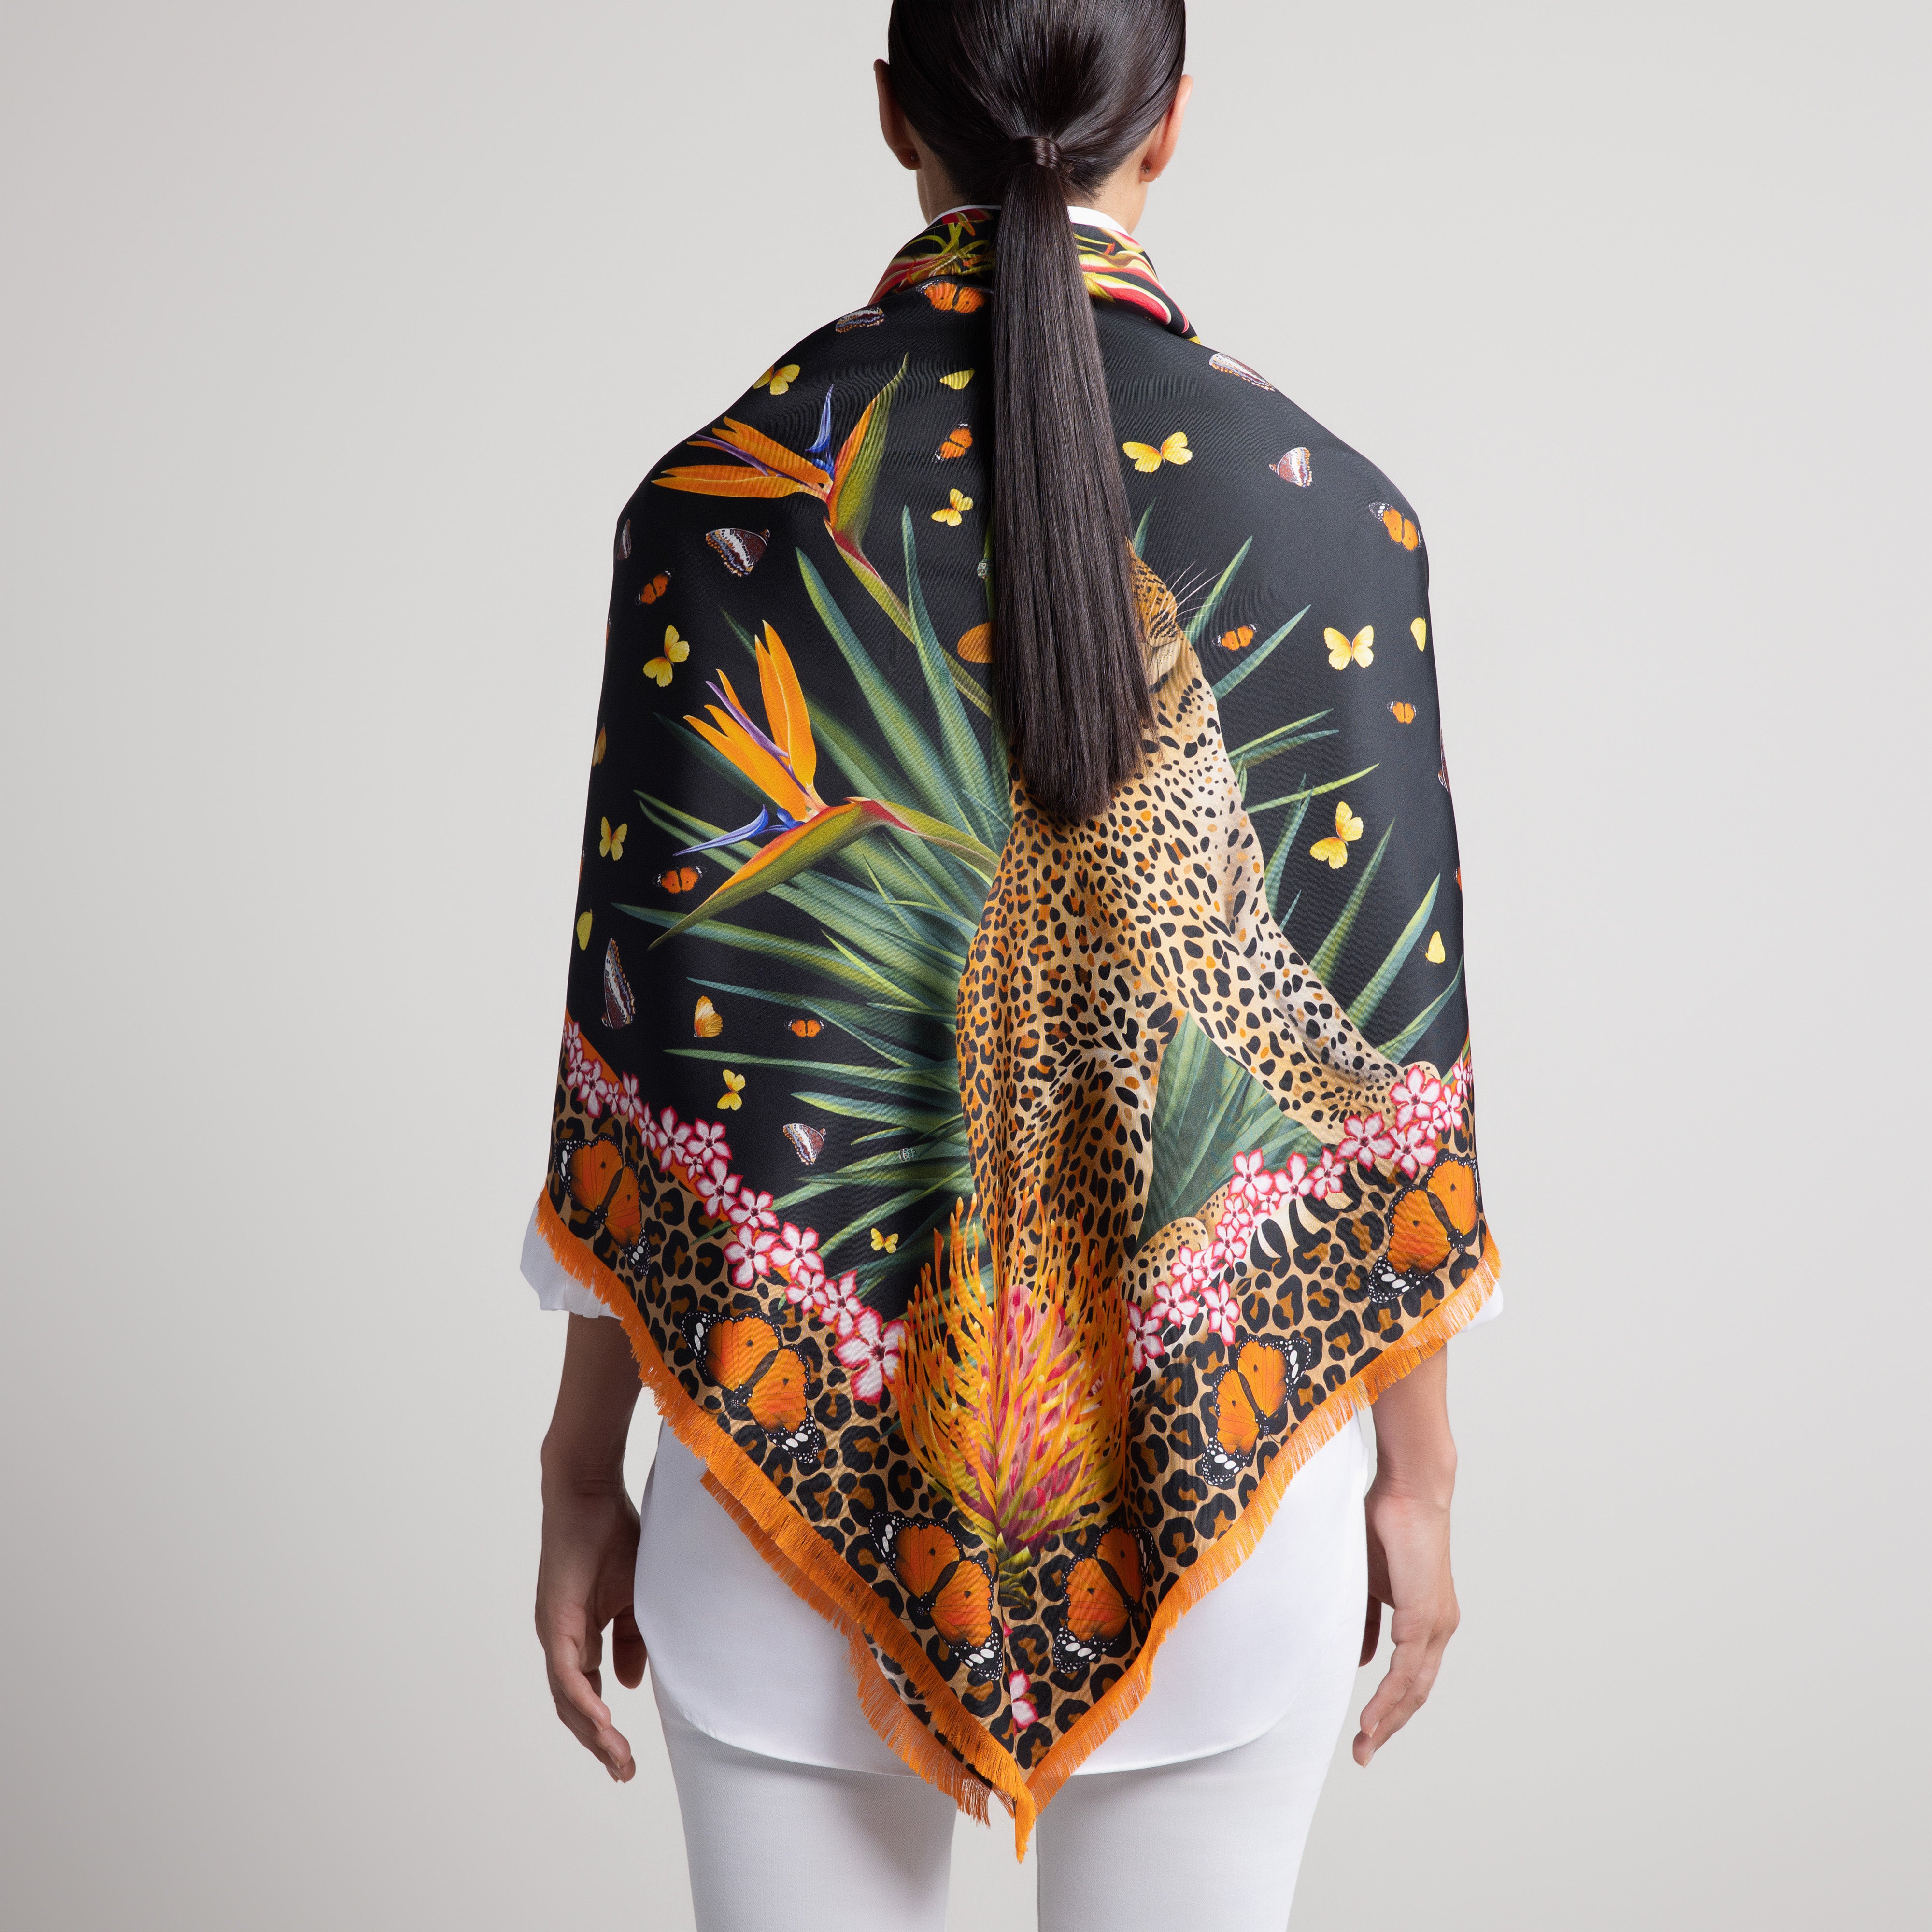 Leopard & Butterfly Grande Silk Scarf in Black with Hand-Feathered Edges